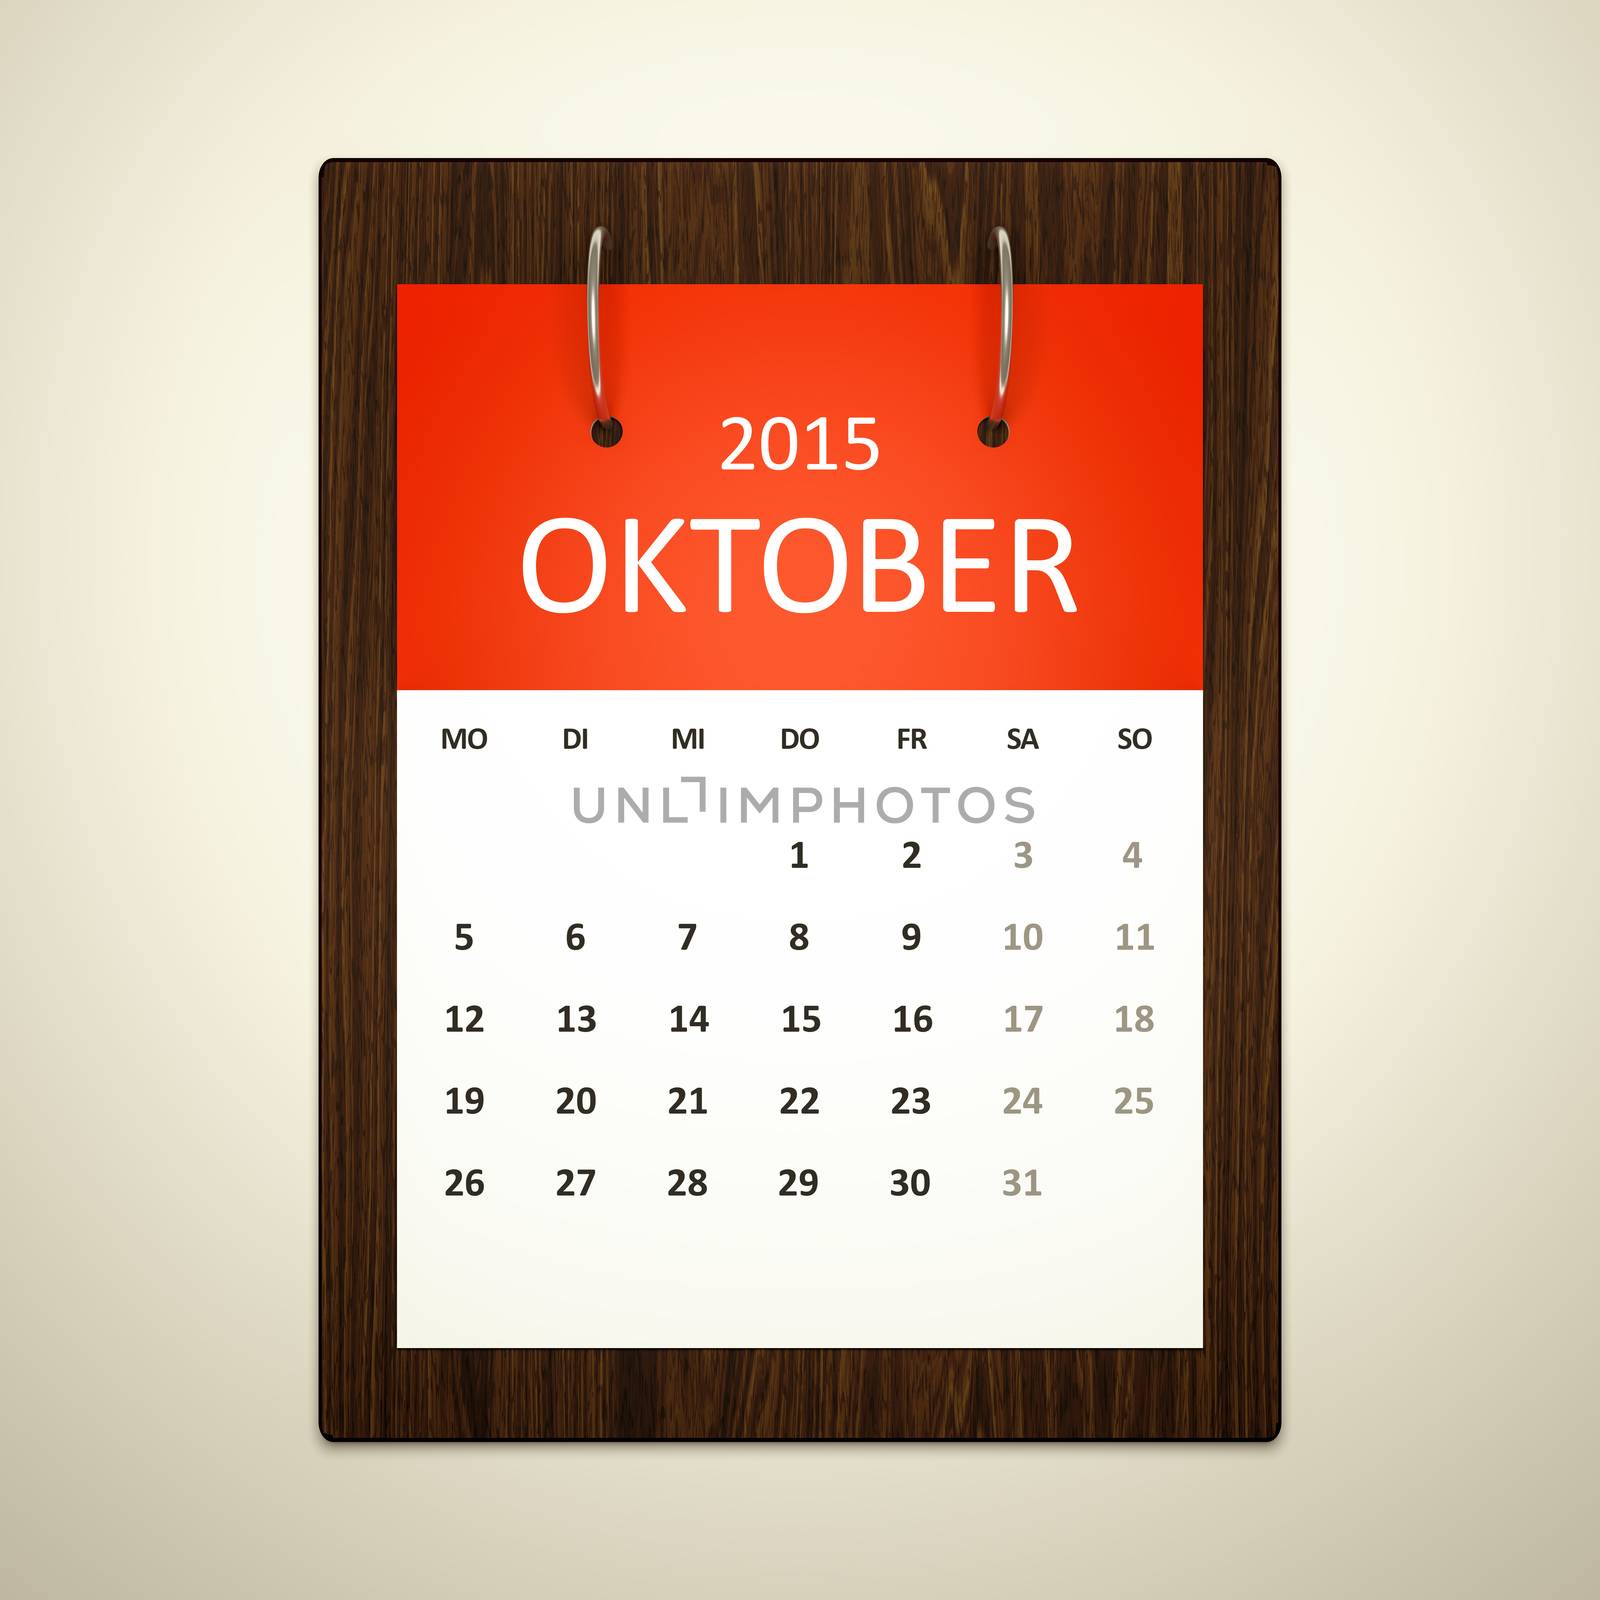 An image of a german calendar for event planning october 2015